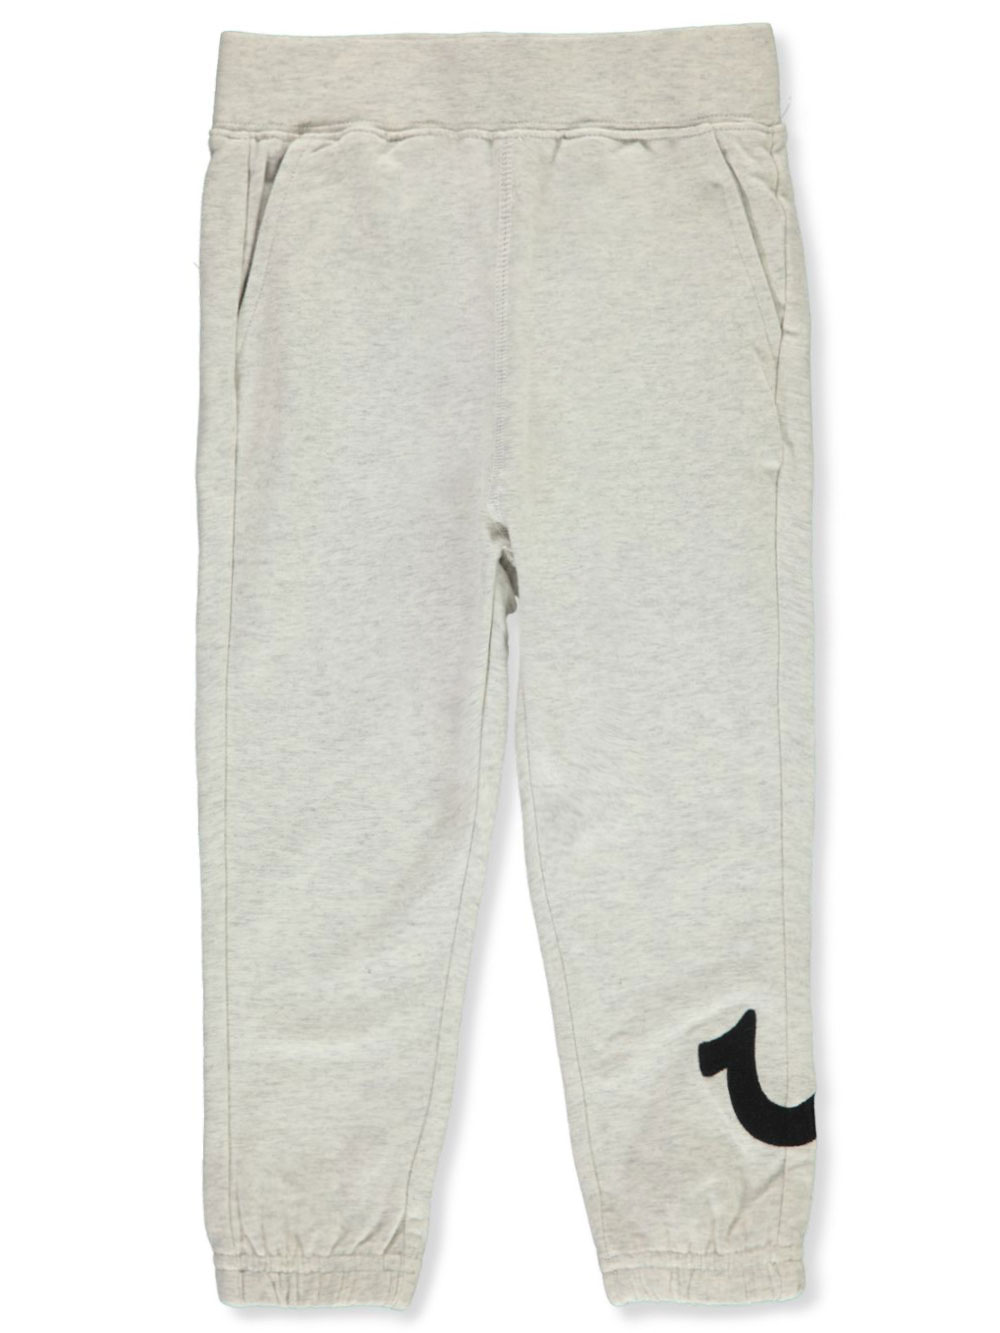 True Religion Sweatpants and Joggers